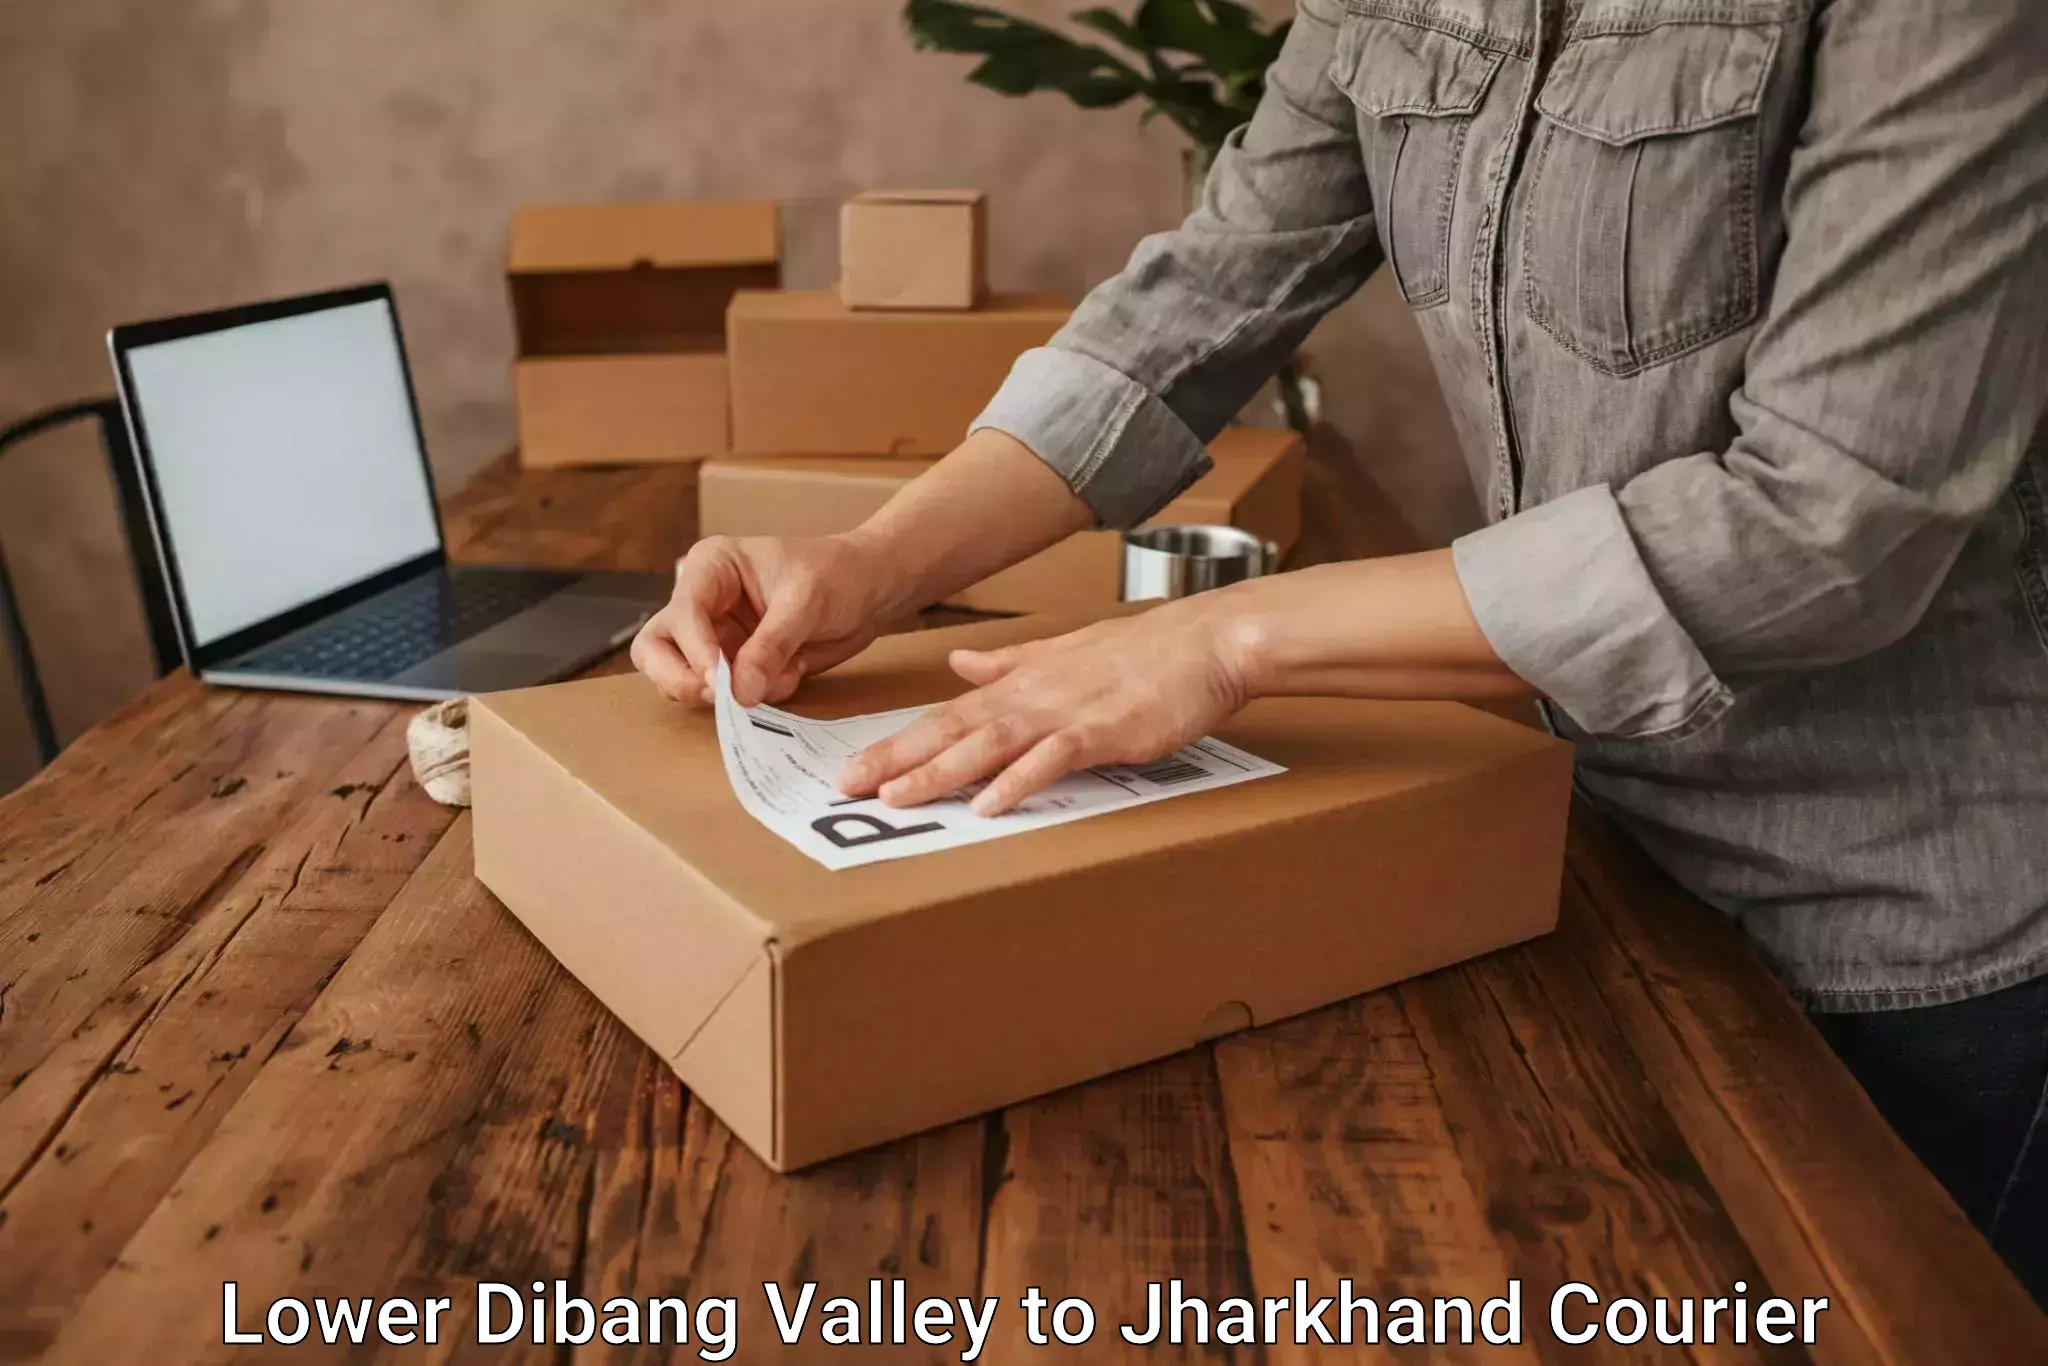 Courier service innovation Lower Dibang Valley to Barwadih